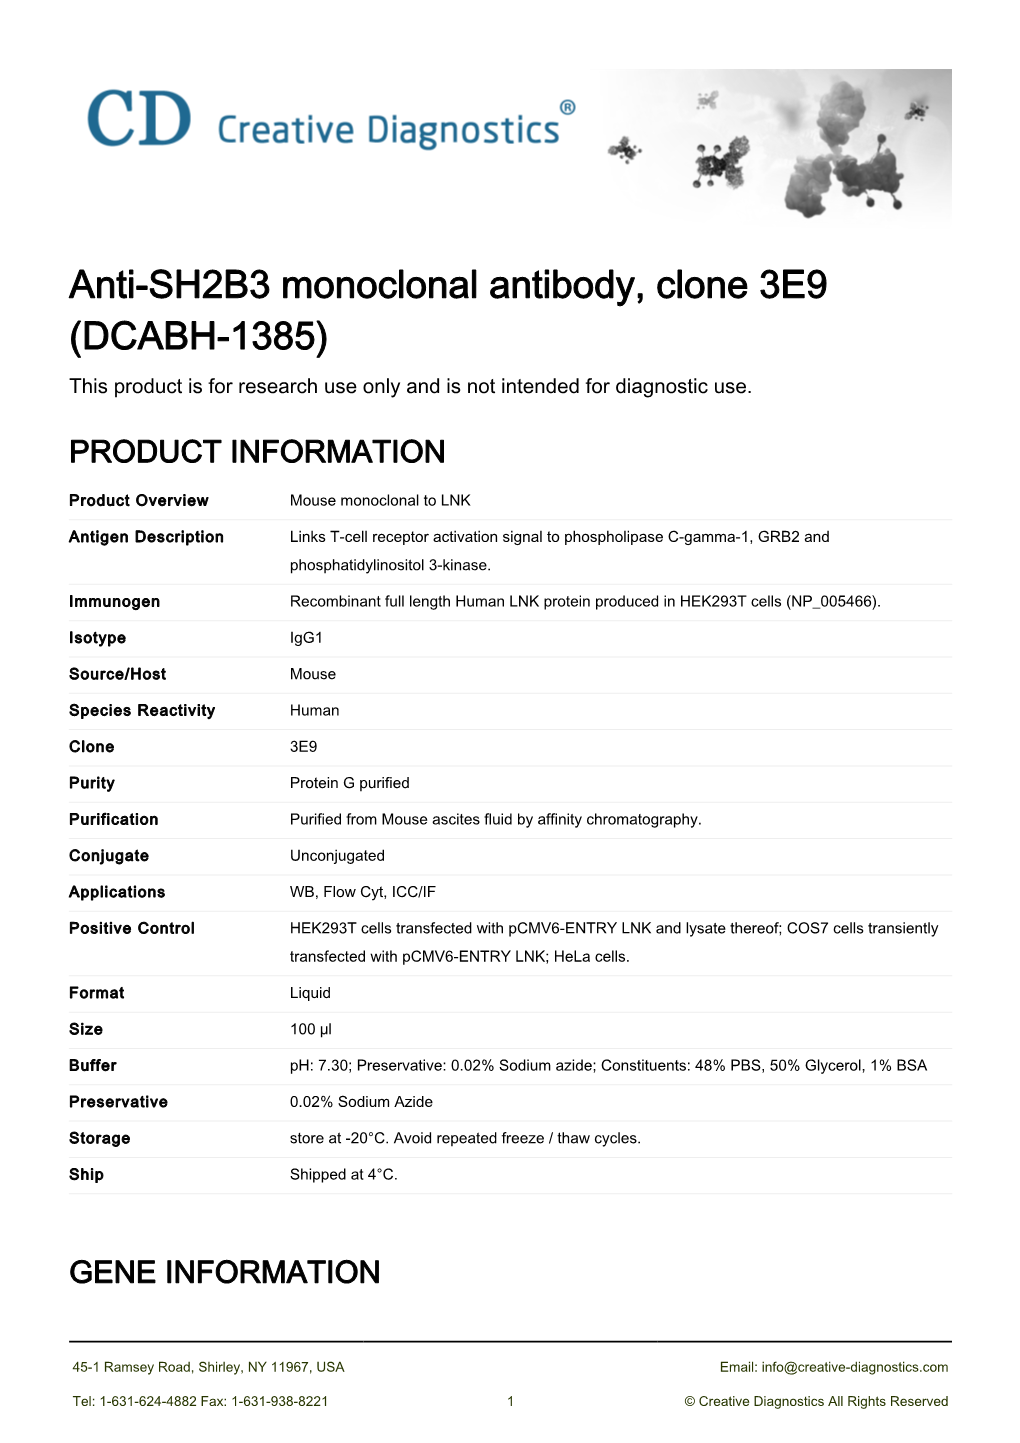 Anti-SH2B3 Monoclonal Antibody, Clone 3E9 (DCABH-1385) This Product Is for Research Use Only and Is Not Intended for Diagnostic Use